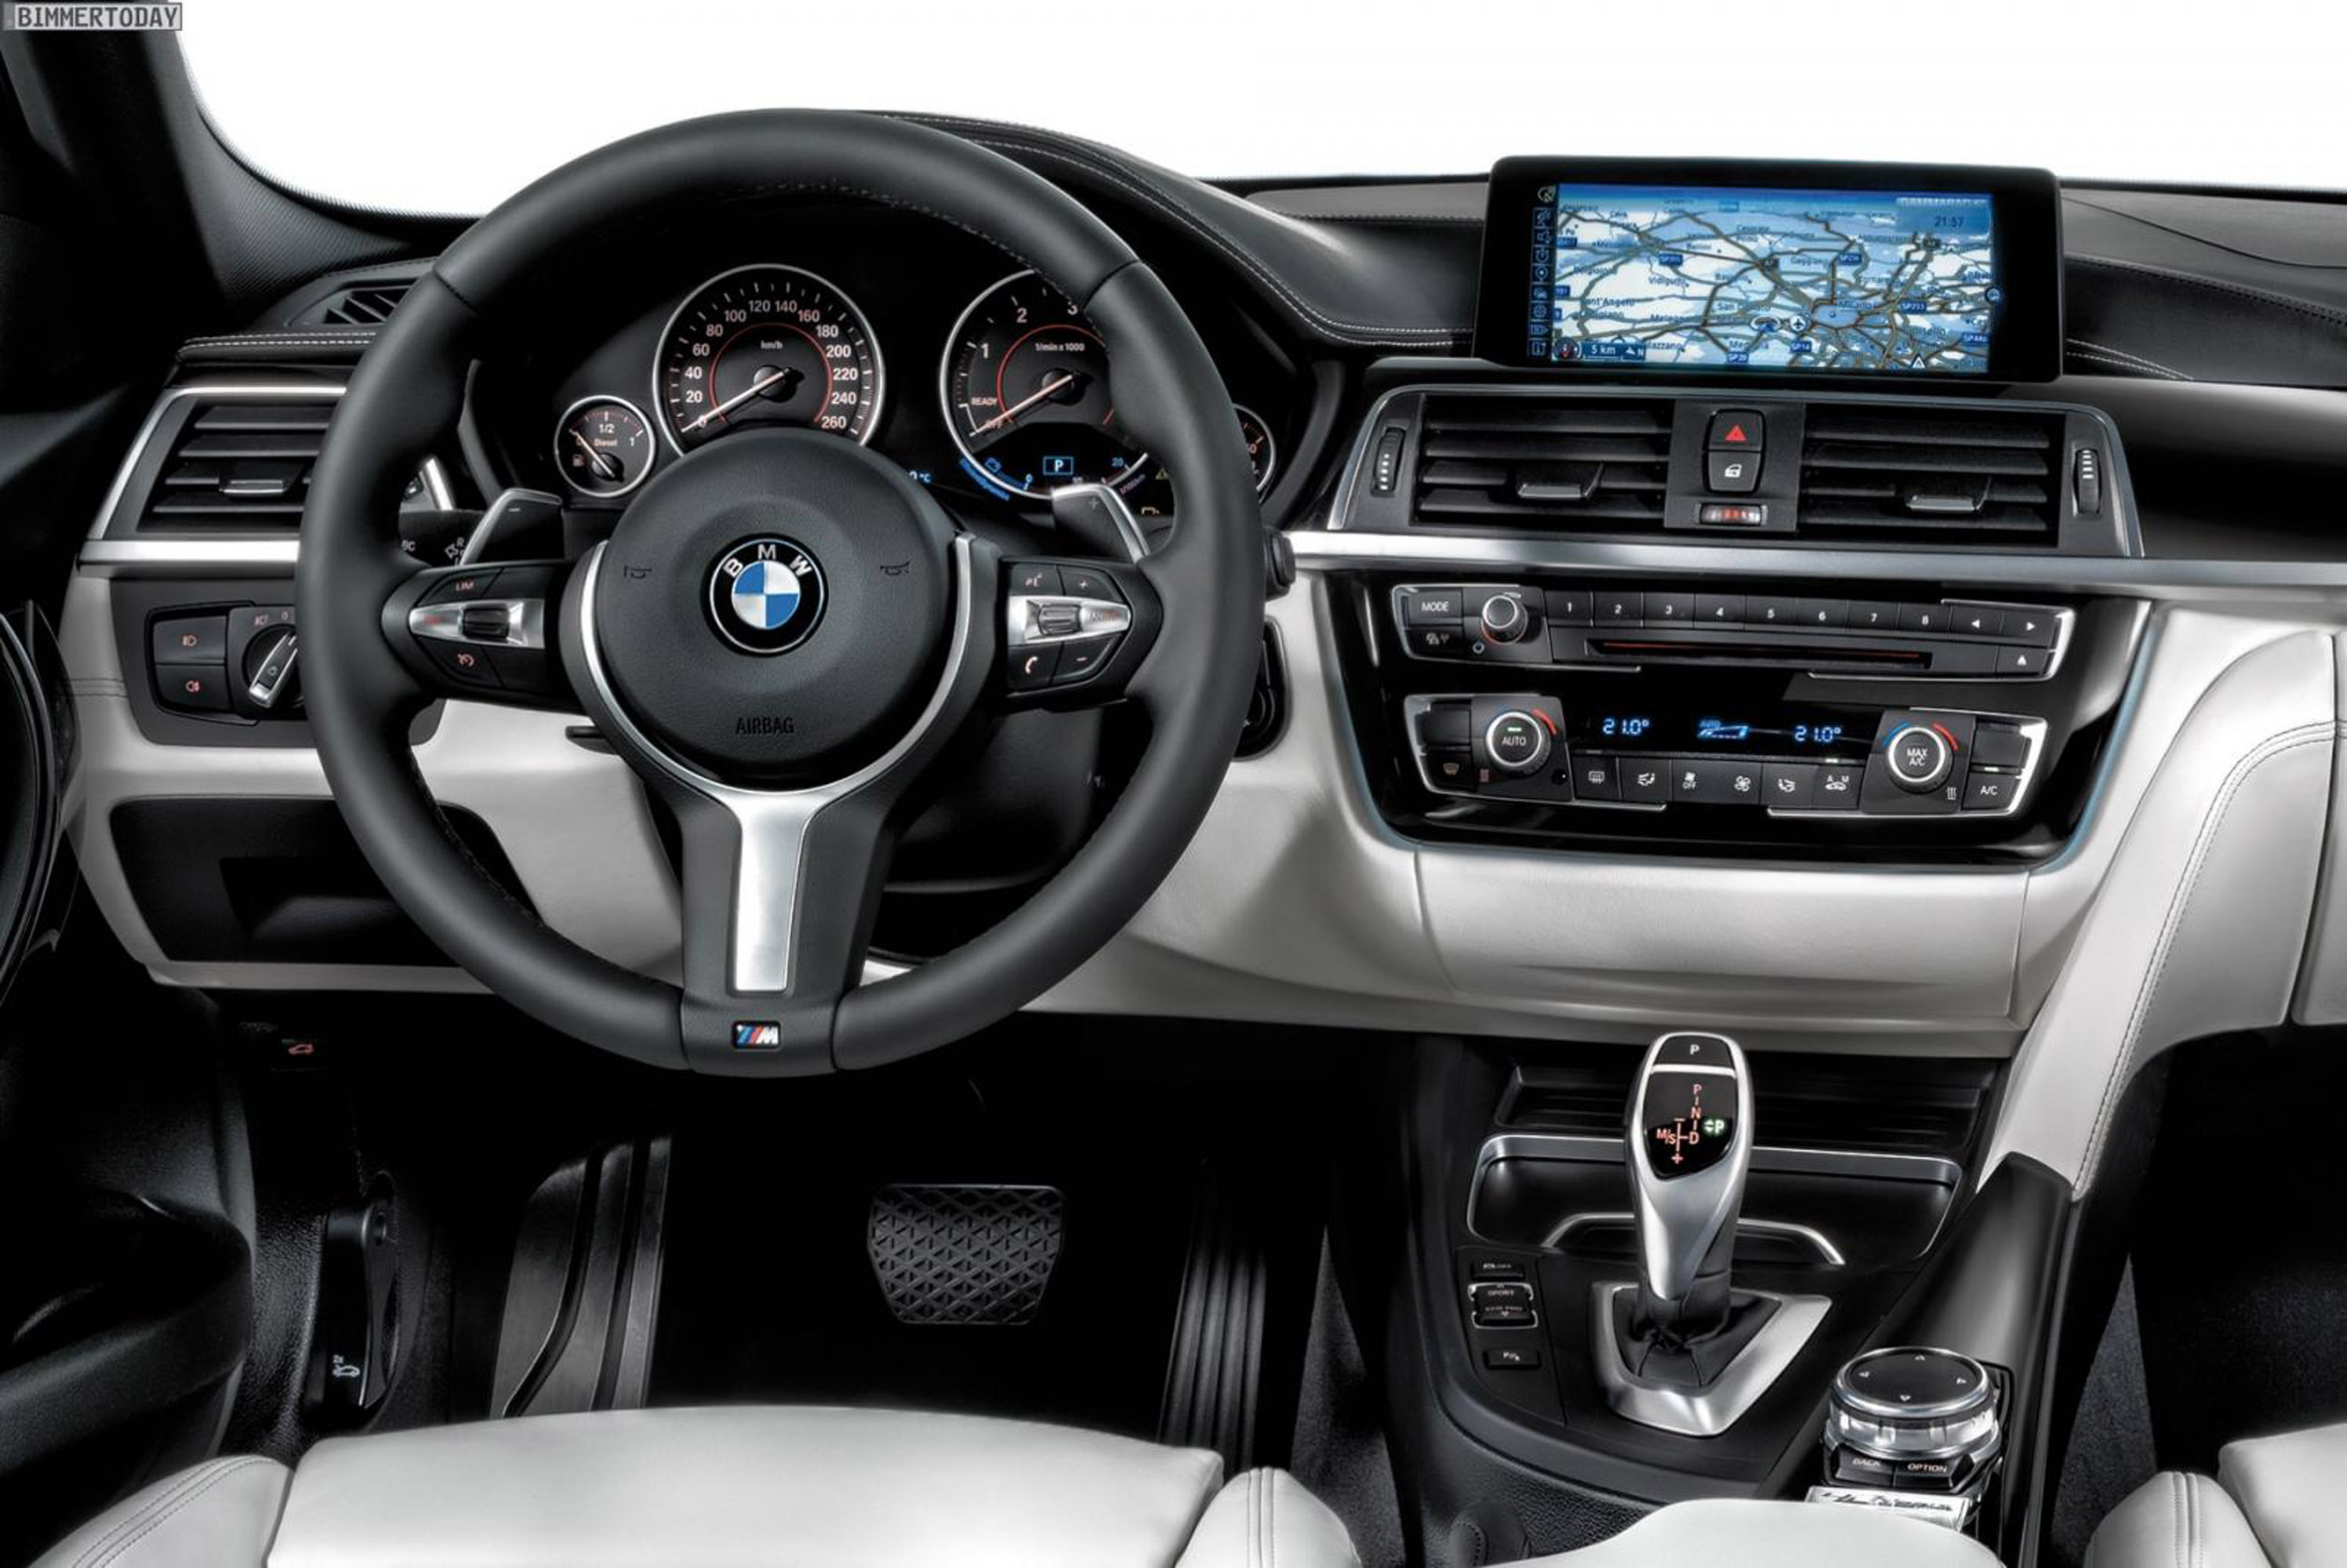 BMW 320d xDrive Touring 40 Years Edition